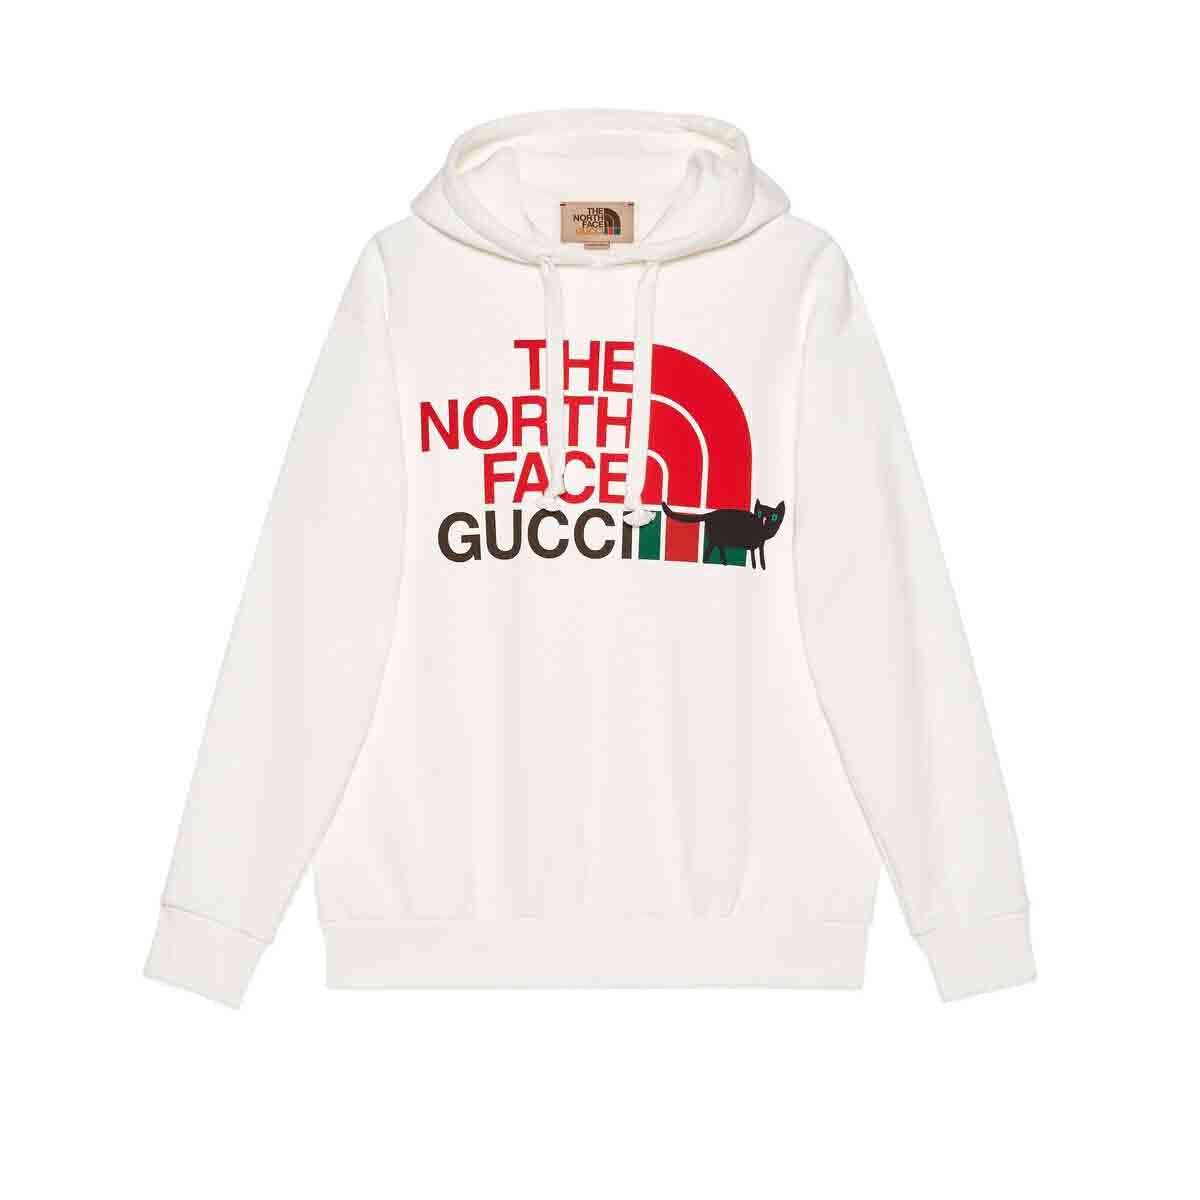 Gucci x The North Face Sweatshirt Off-White Men's - FW21 - US